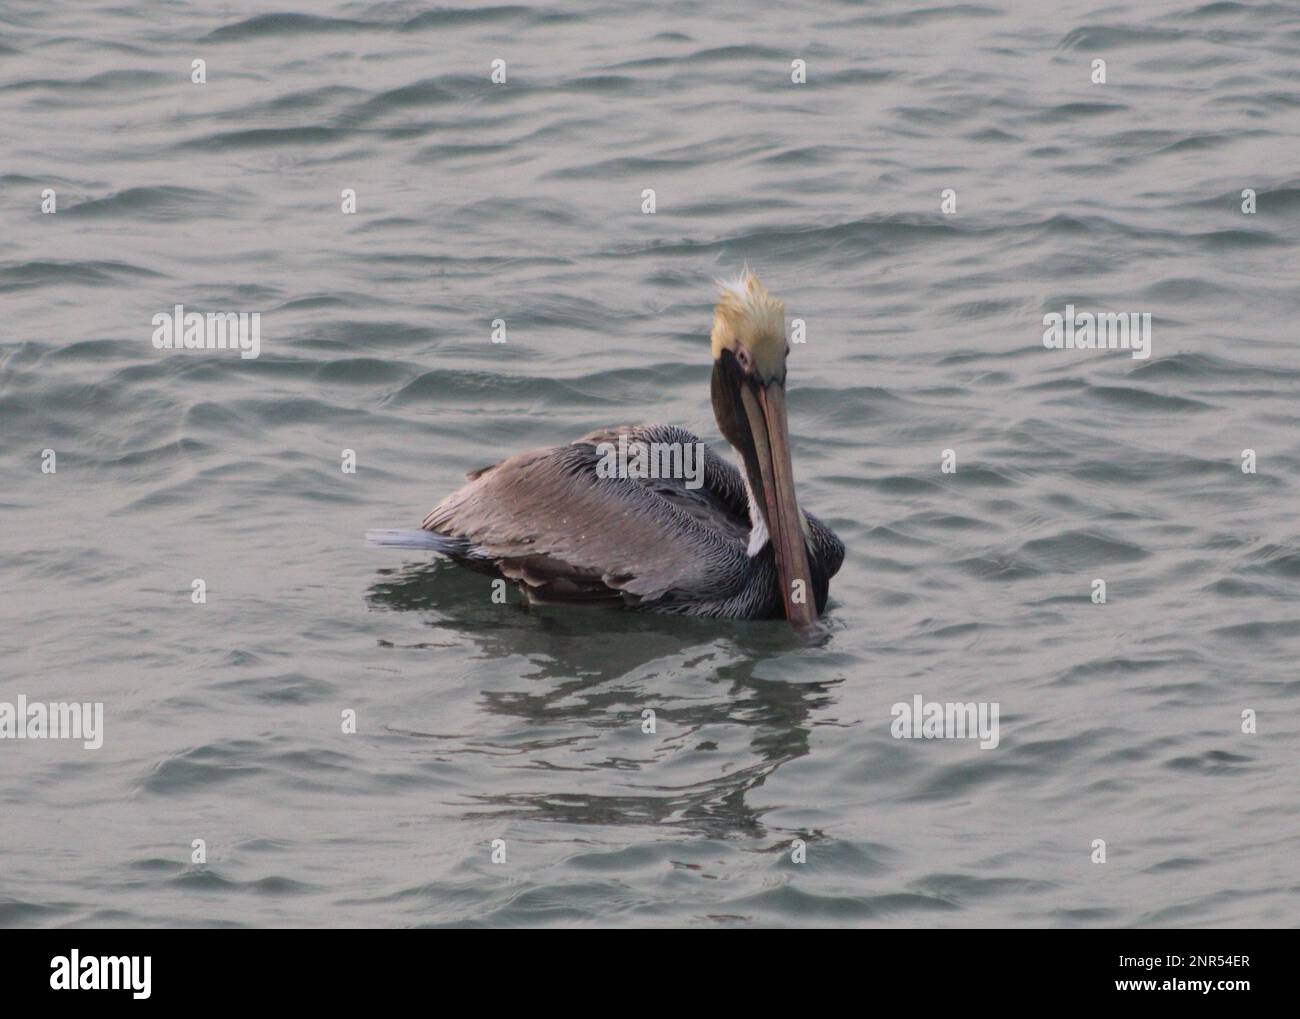 Pelican on the water, Gulf of Mexico, South Padre Island Texas Stock Photo